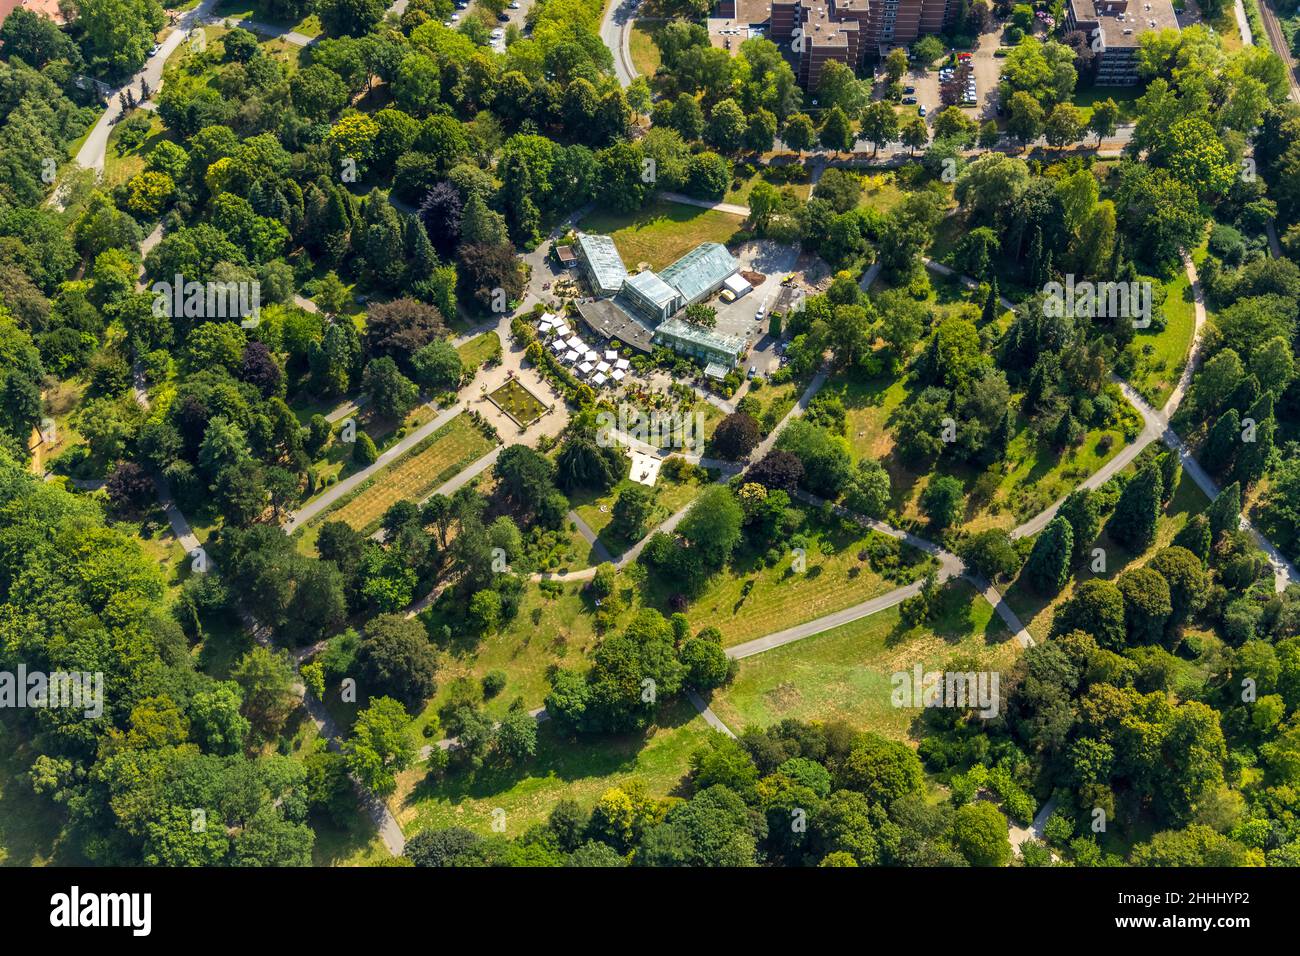 Aerial view, plant show houses and 'Café Orchidee' at Dortmund Zoo, Rombergpark, Dortmund, North Rhine-Westphalia, Germany, aerial photograph, aerial Stock Photo